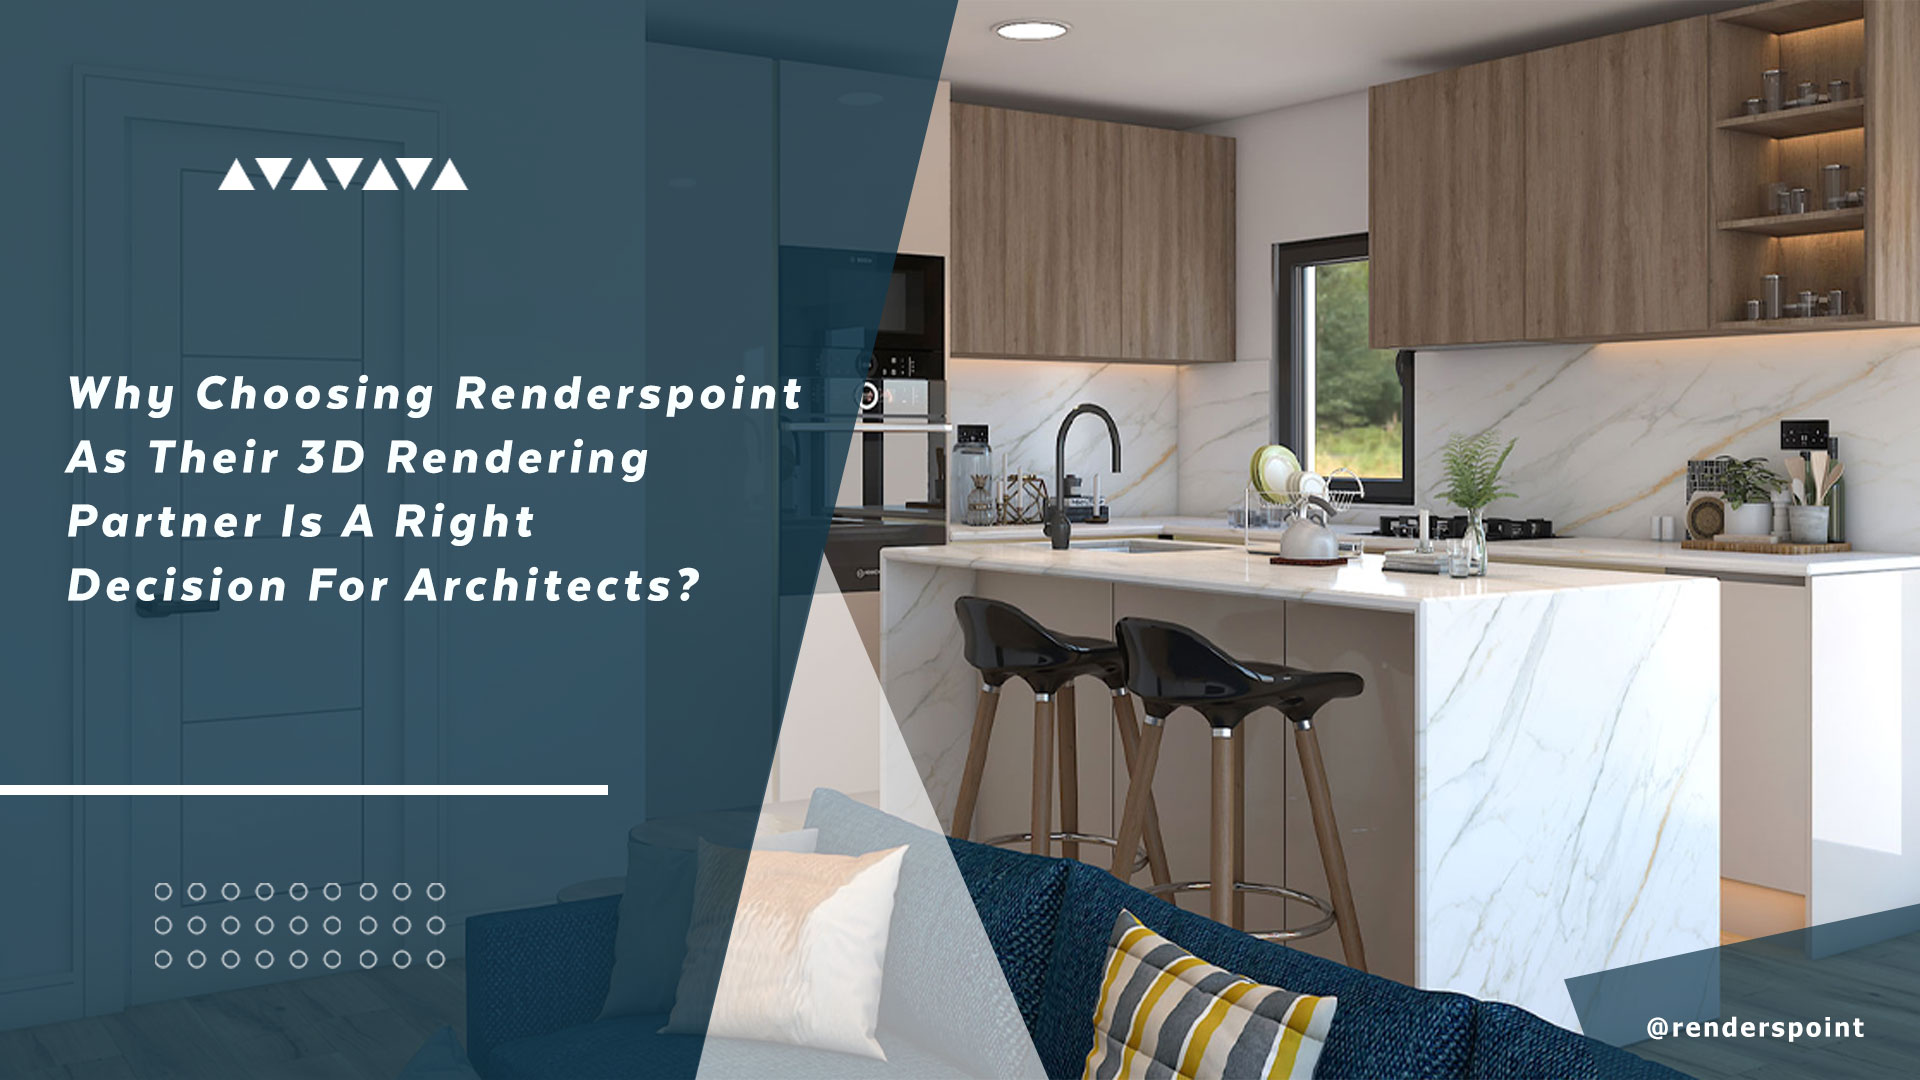 Why Choosing Renderspoint as their 3D Rendering Partner is a right decision for Architects?